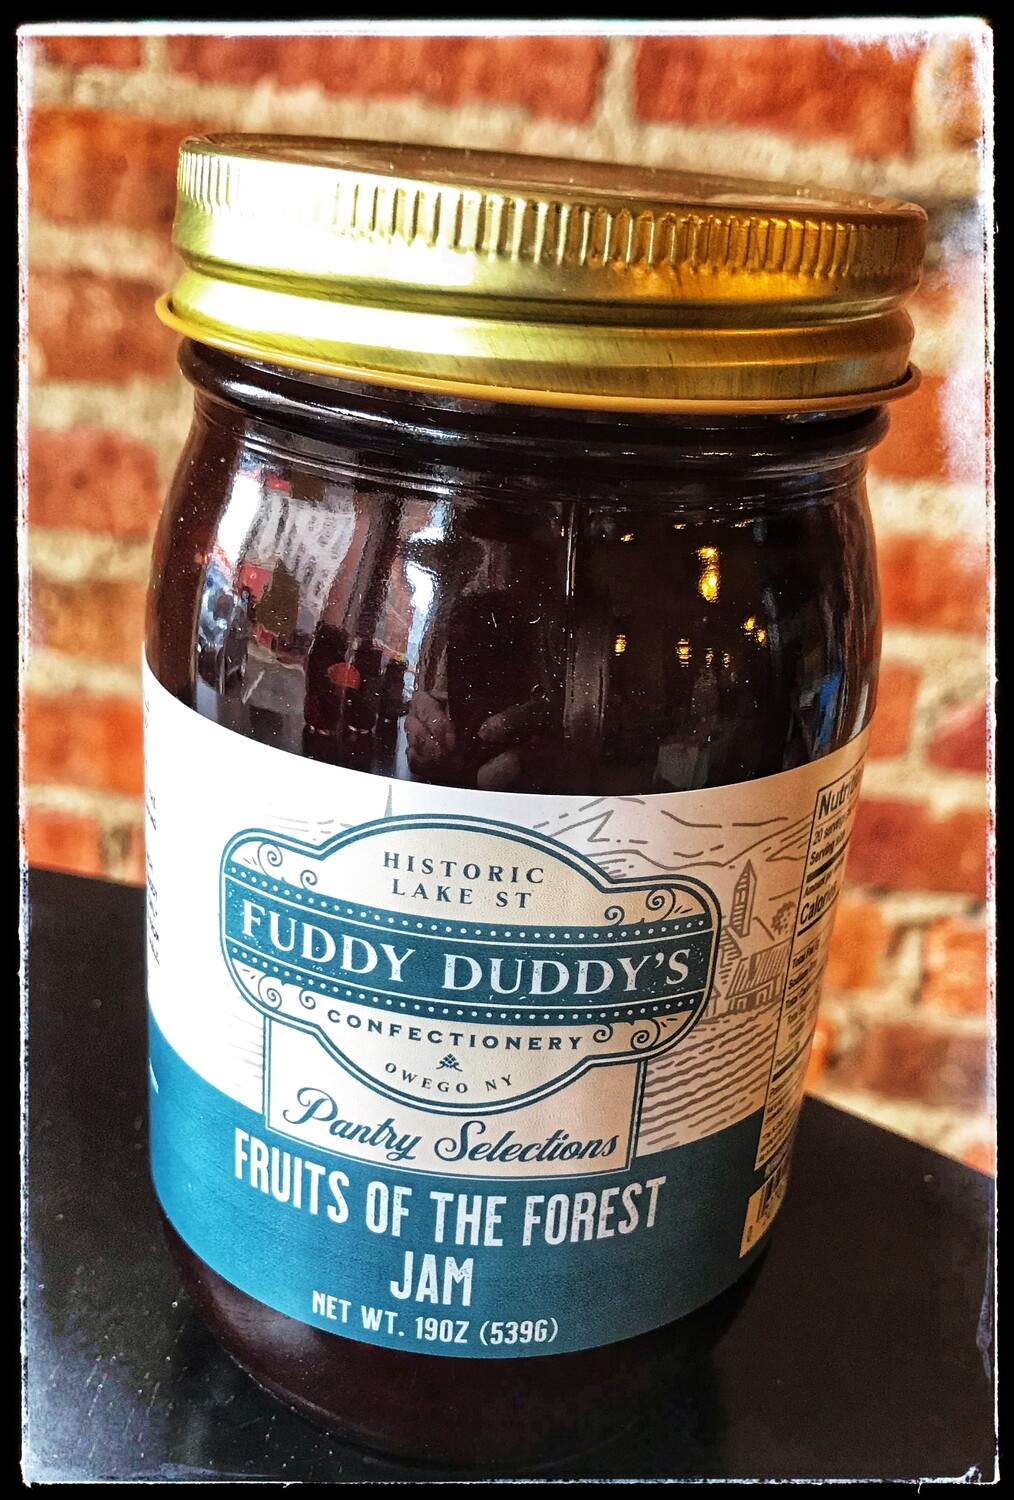 Fuddy Duddy's Fruits of the Forest Jam